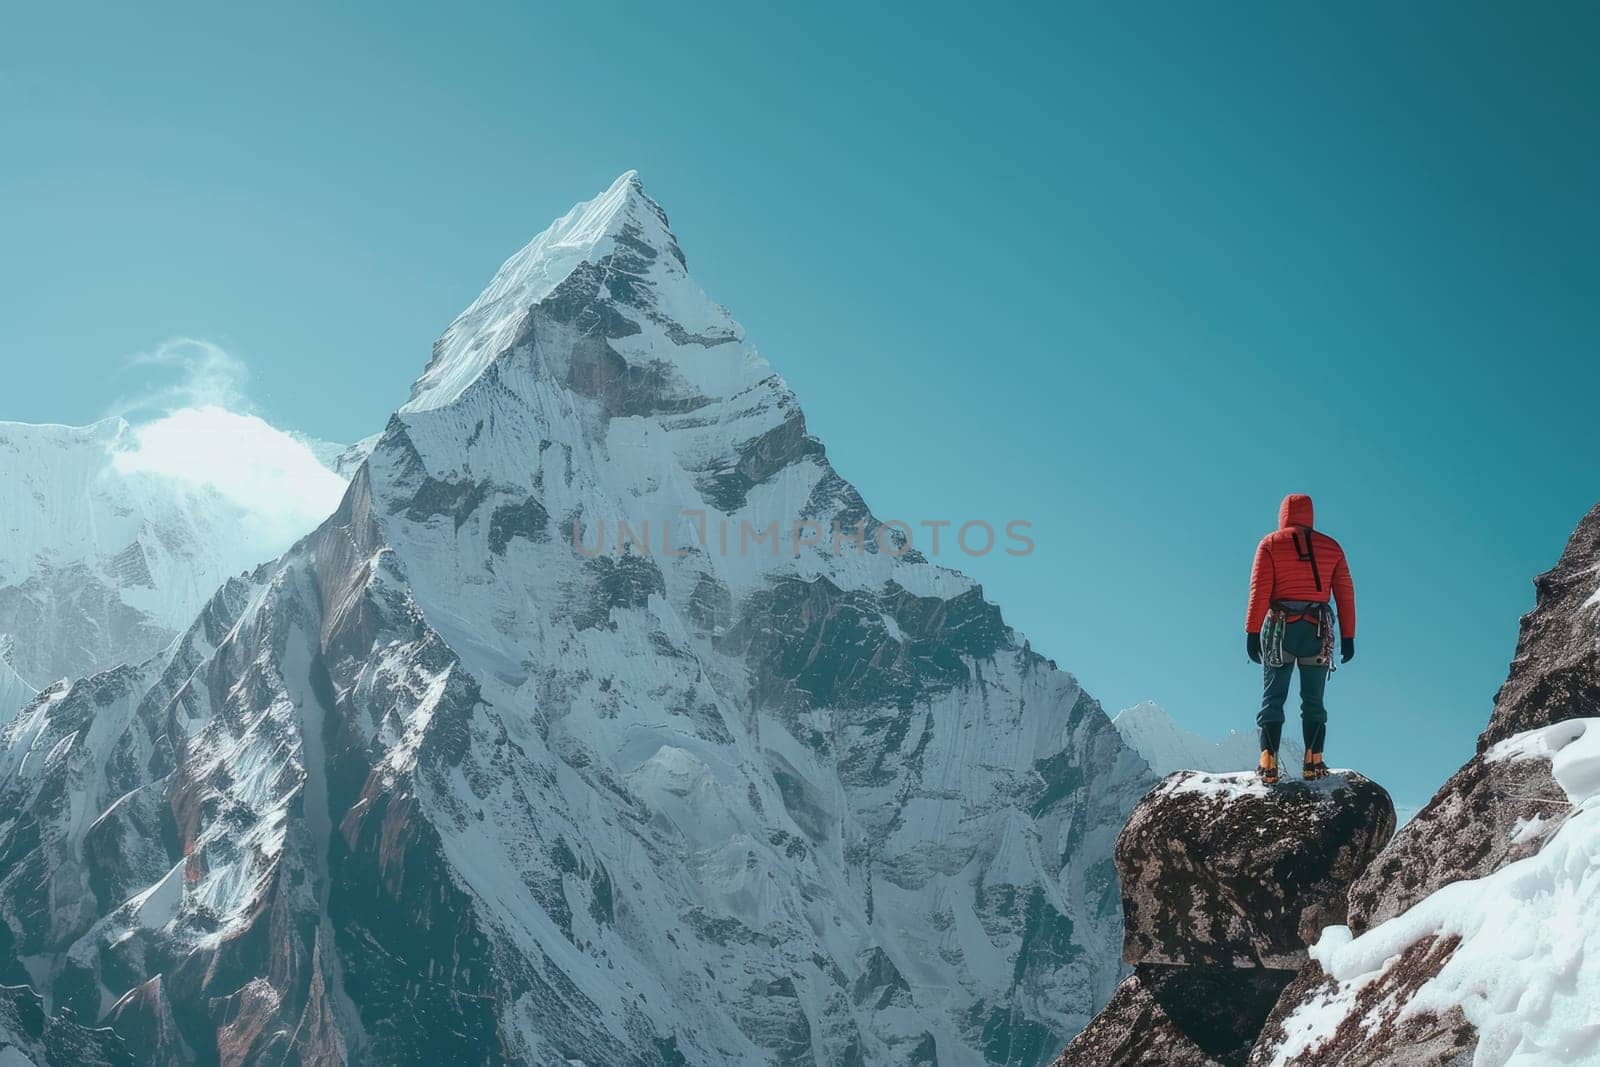 A lone adventurer in a red jacket stands facing the majestic peak of a snow-capped mountain, epitomizing the challenge of the ascent.